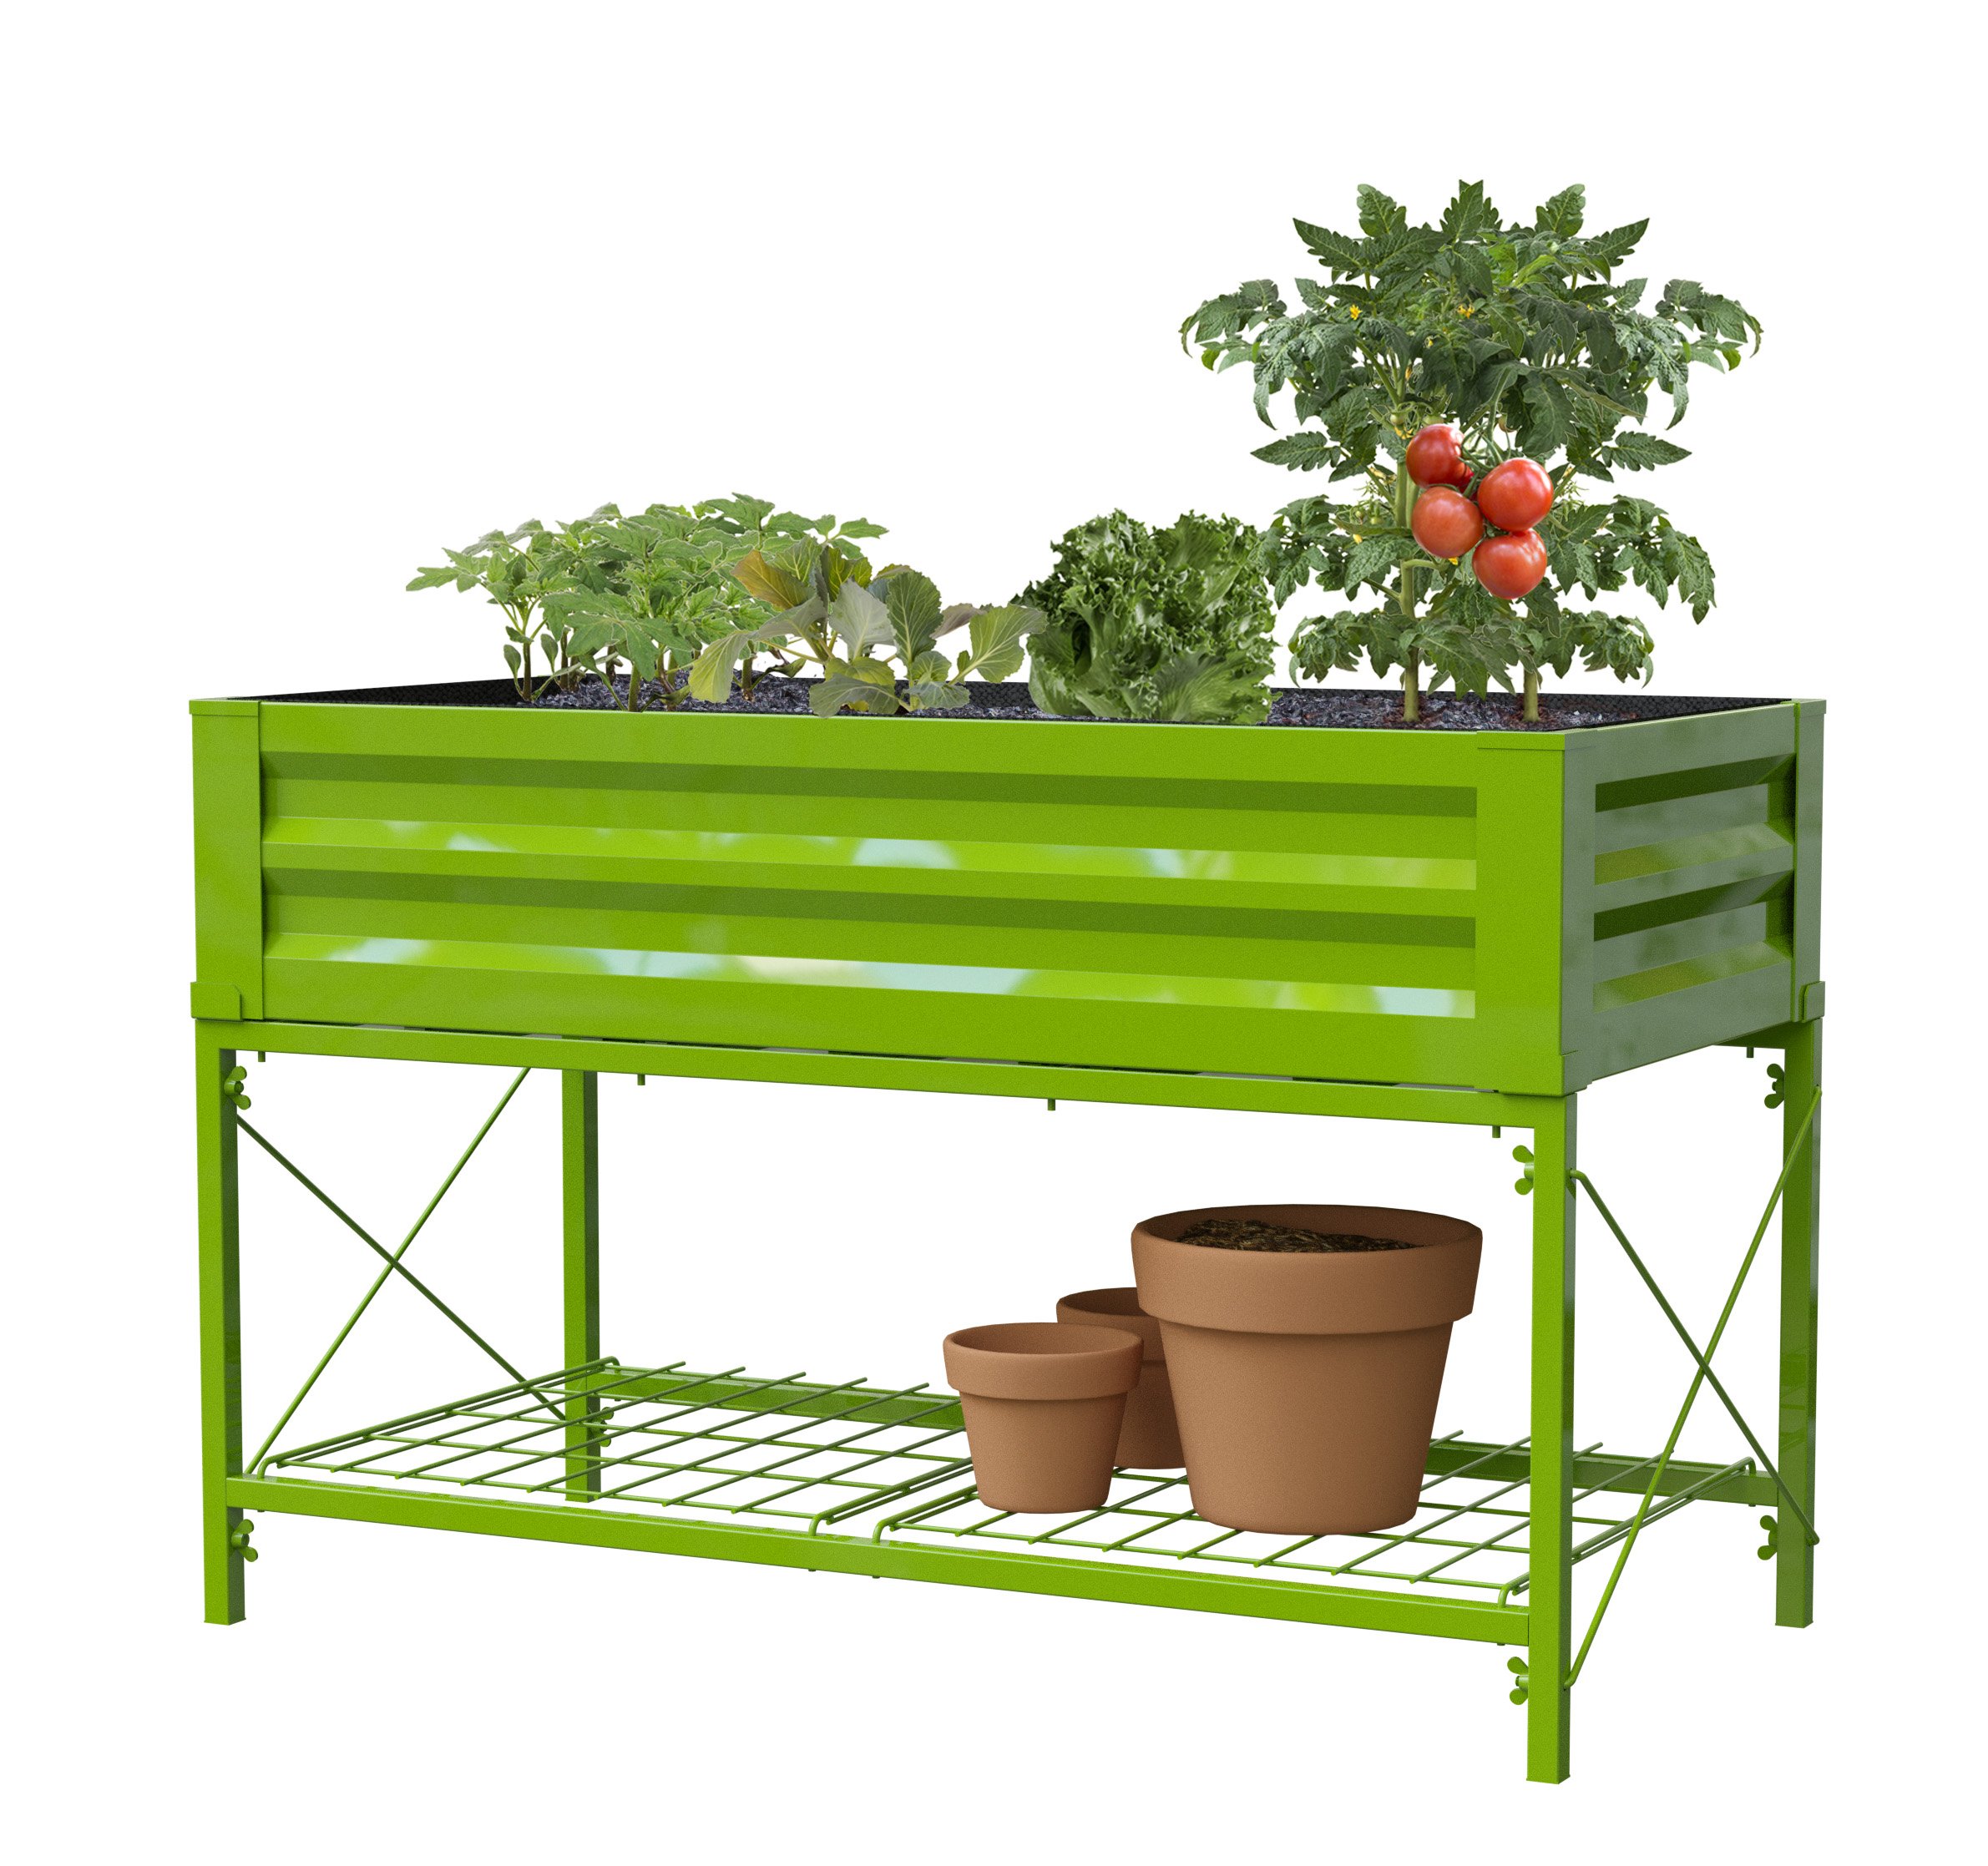 Panacea Stand Up Metal Raised Garden Planter with Liner (Moss Green)